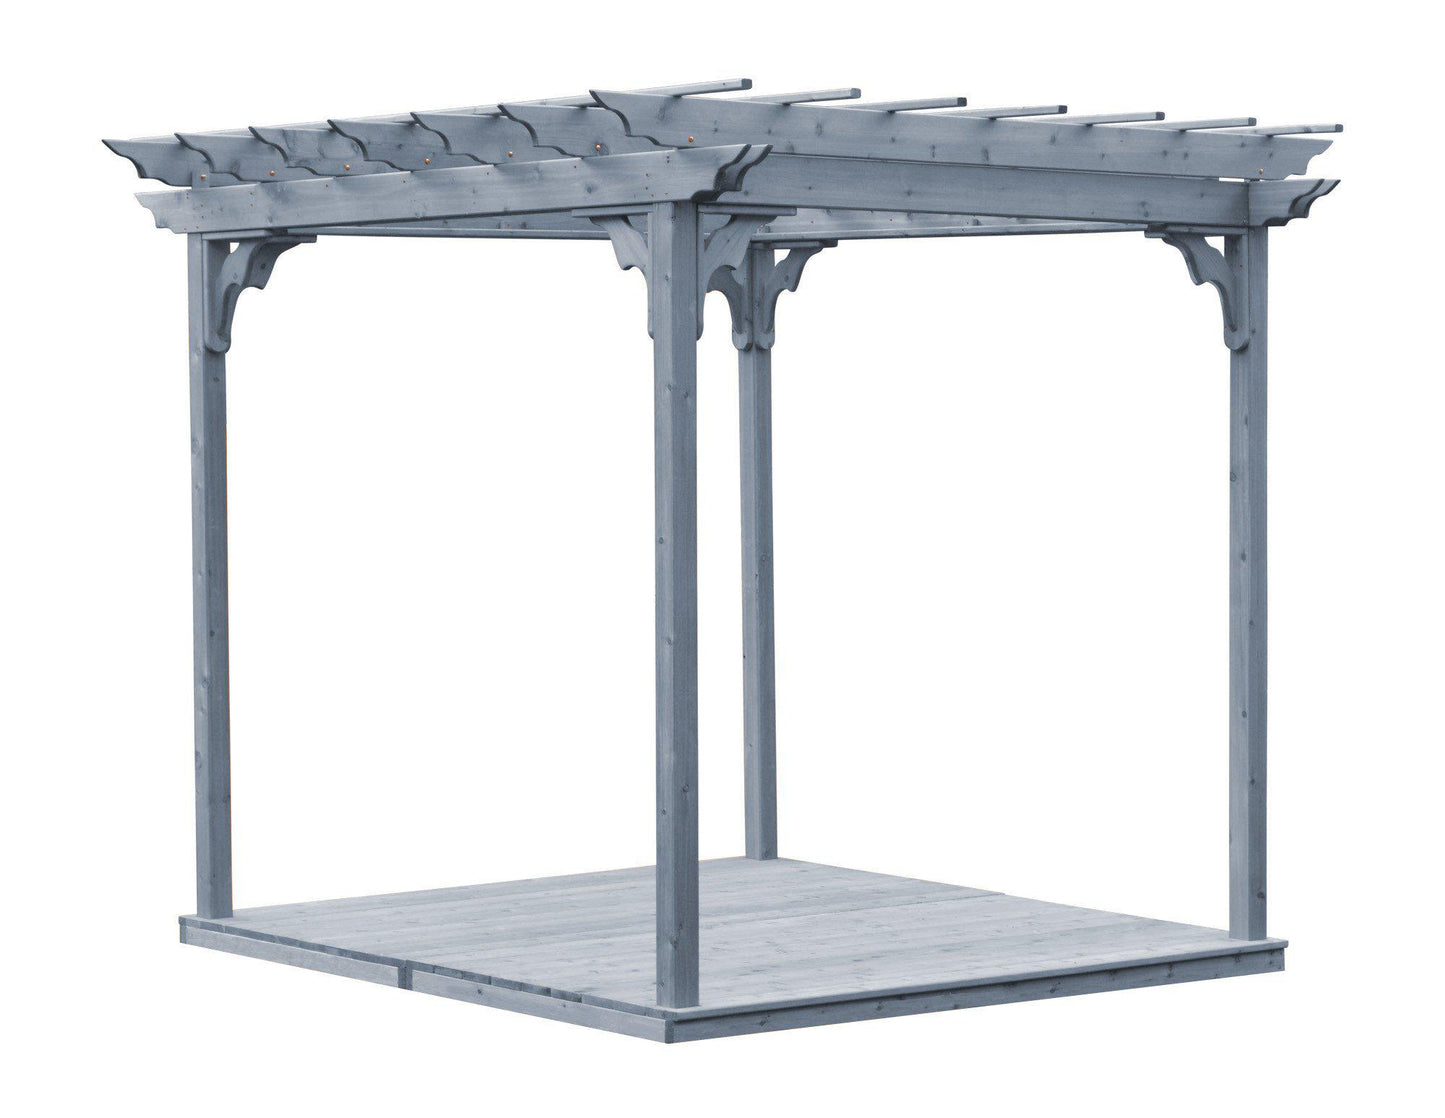 A&L Furniture Co. Western Red Cedar 6'x8' Pergola w/Deck & Swing Hangers (THIS ITEM HAS BEEN DISCONTINUED) - LEAD TIME TO SHIP 2 WEEKS